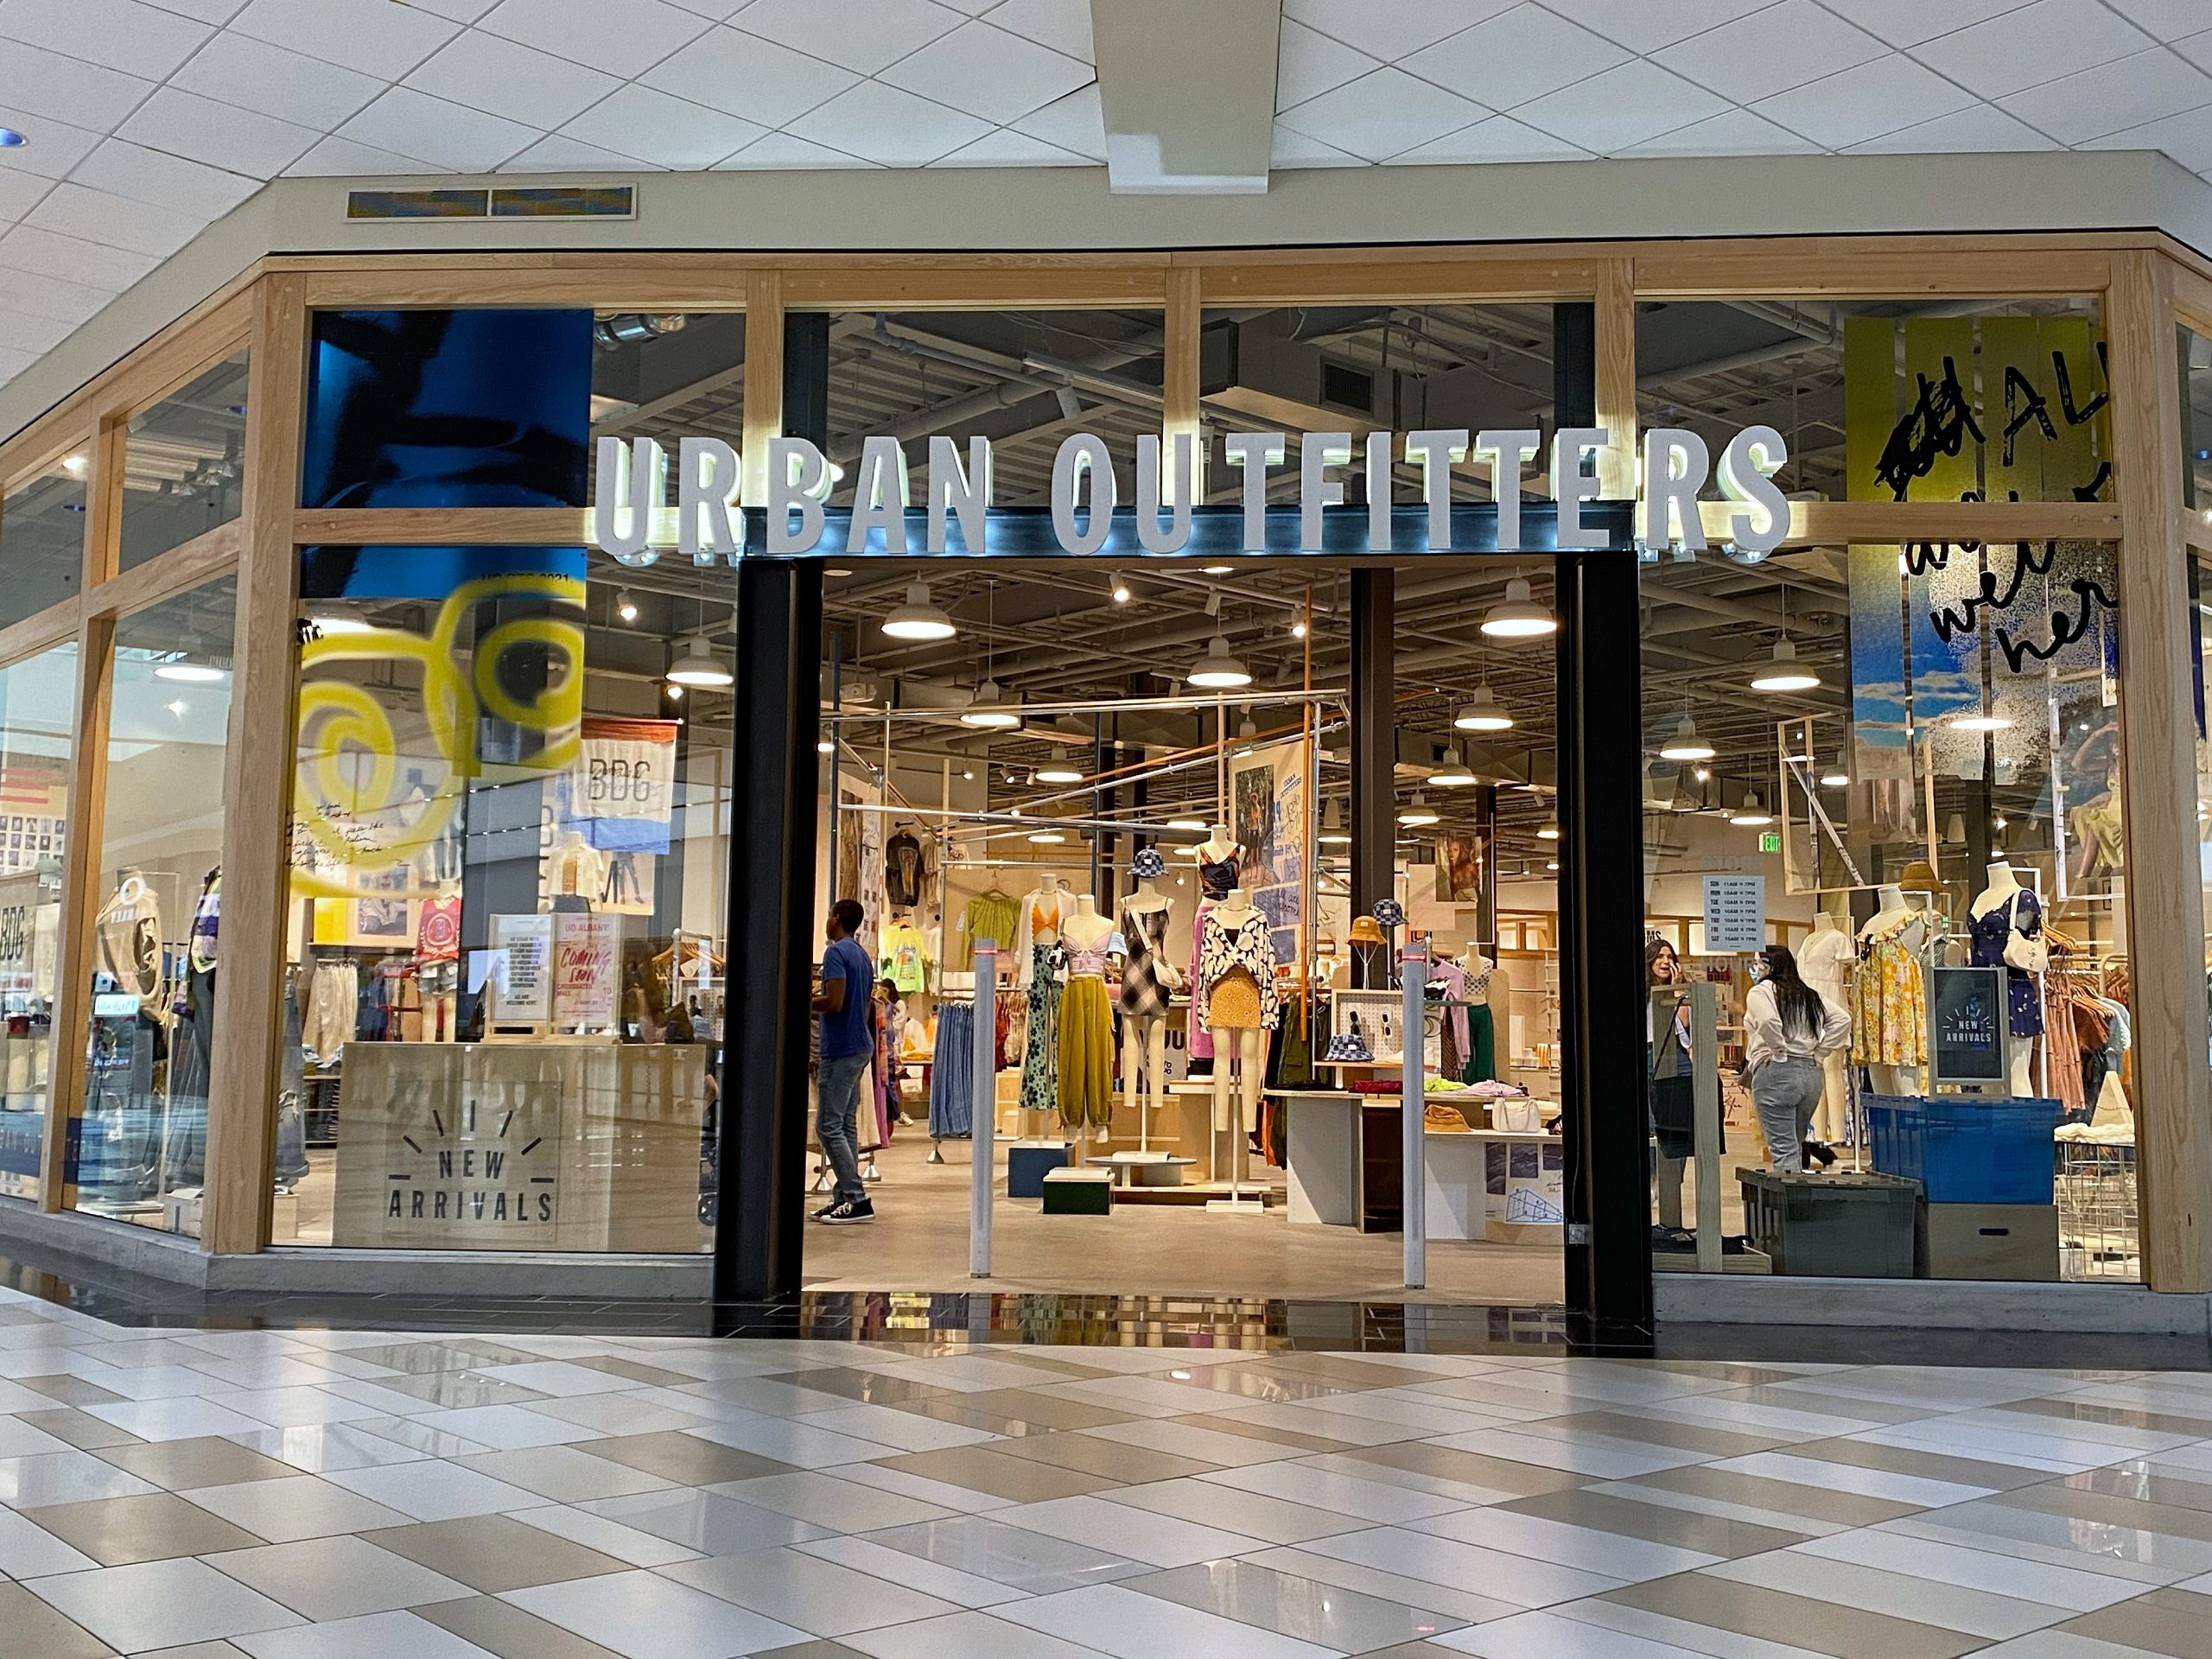 Urban Outfitters storefront